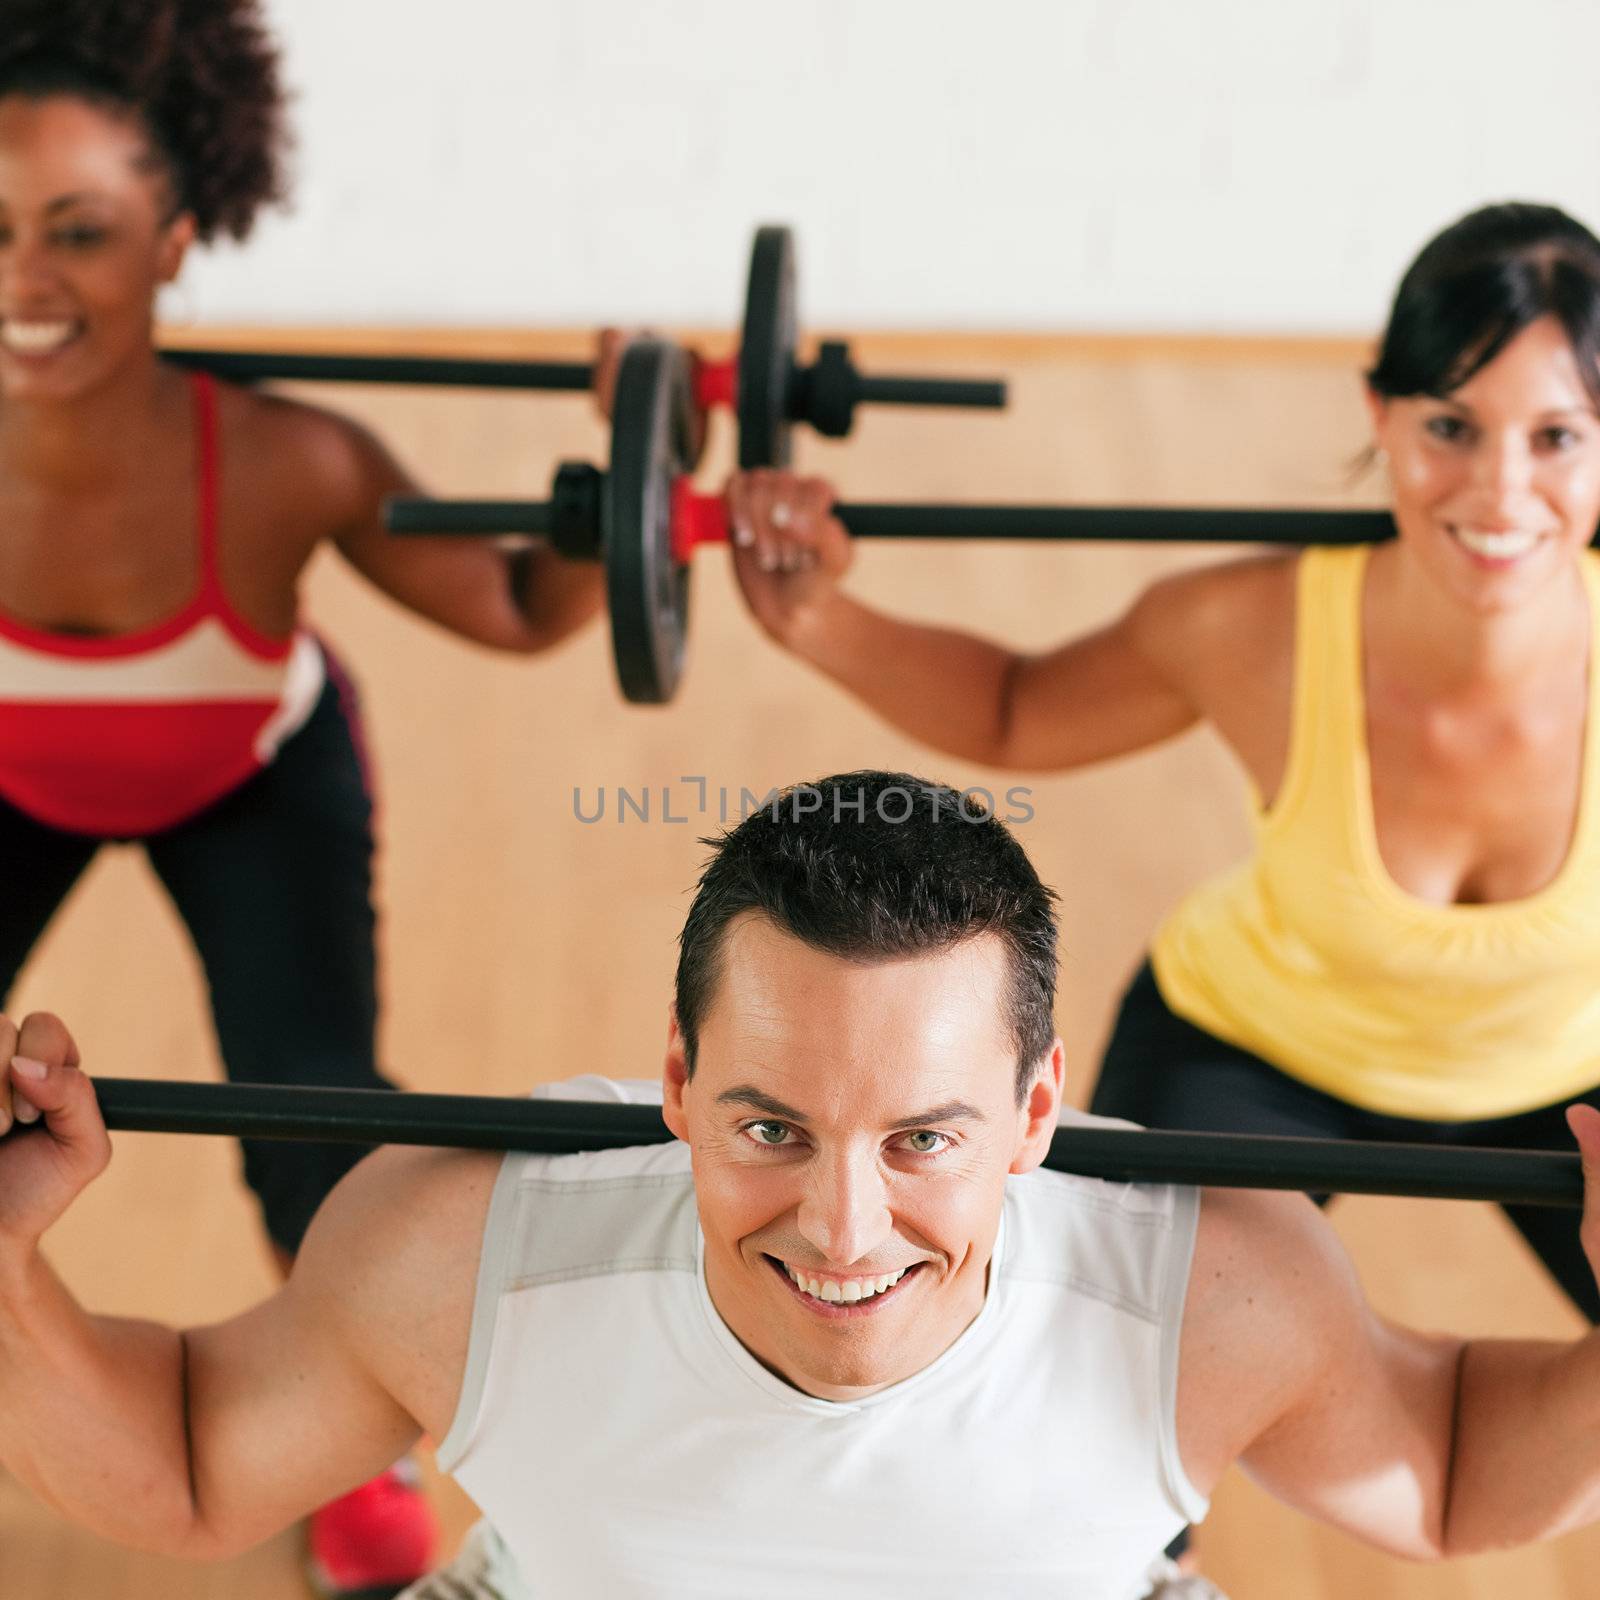 Group of three people exercising using barbells in the gym to gain strength and fitness